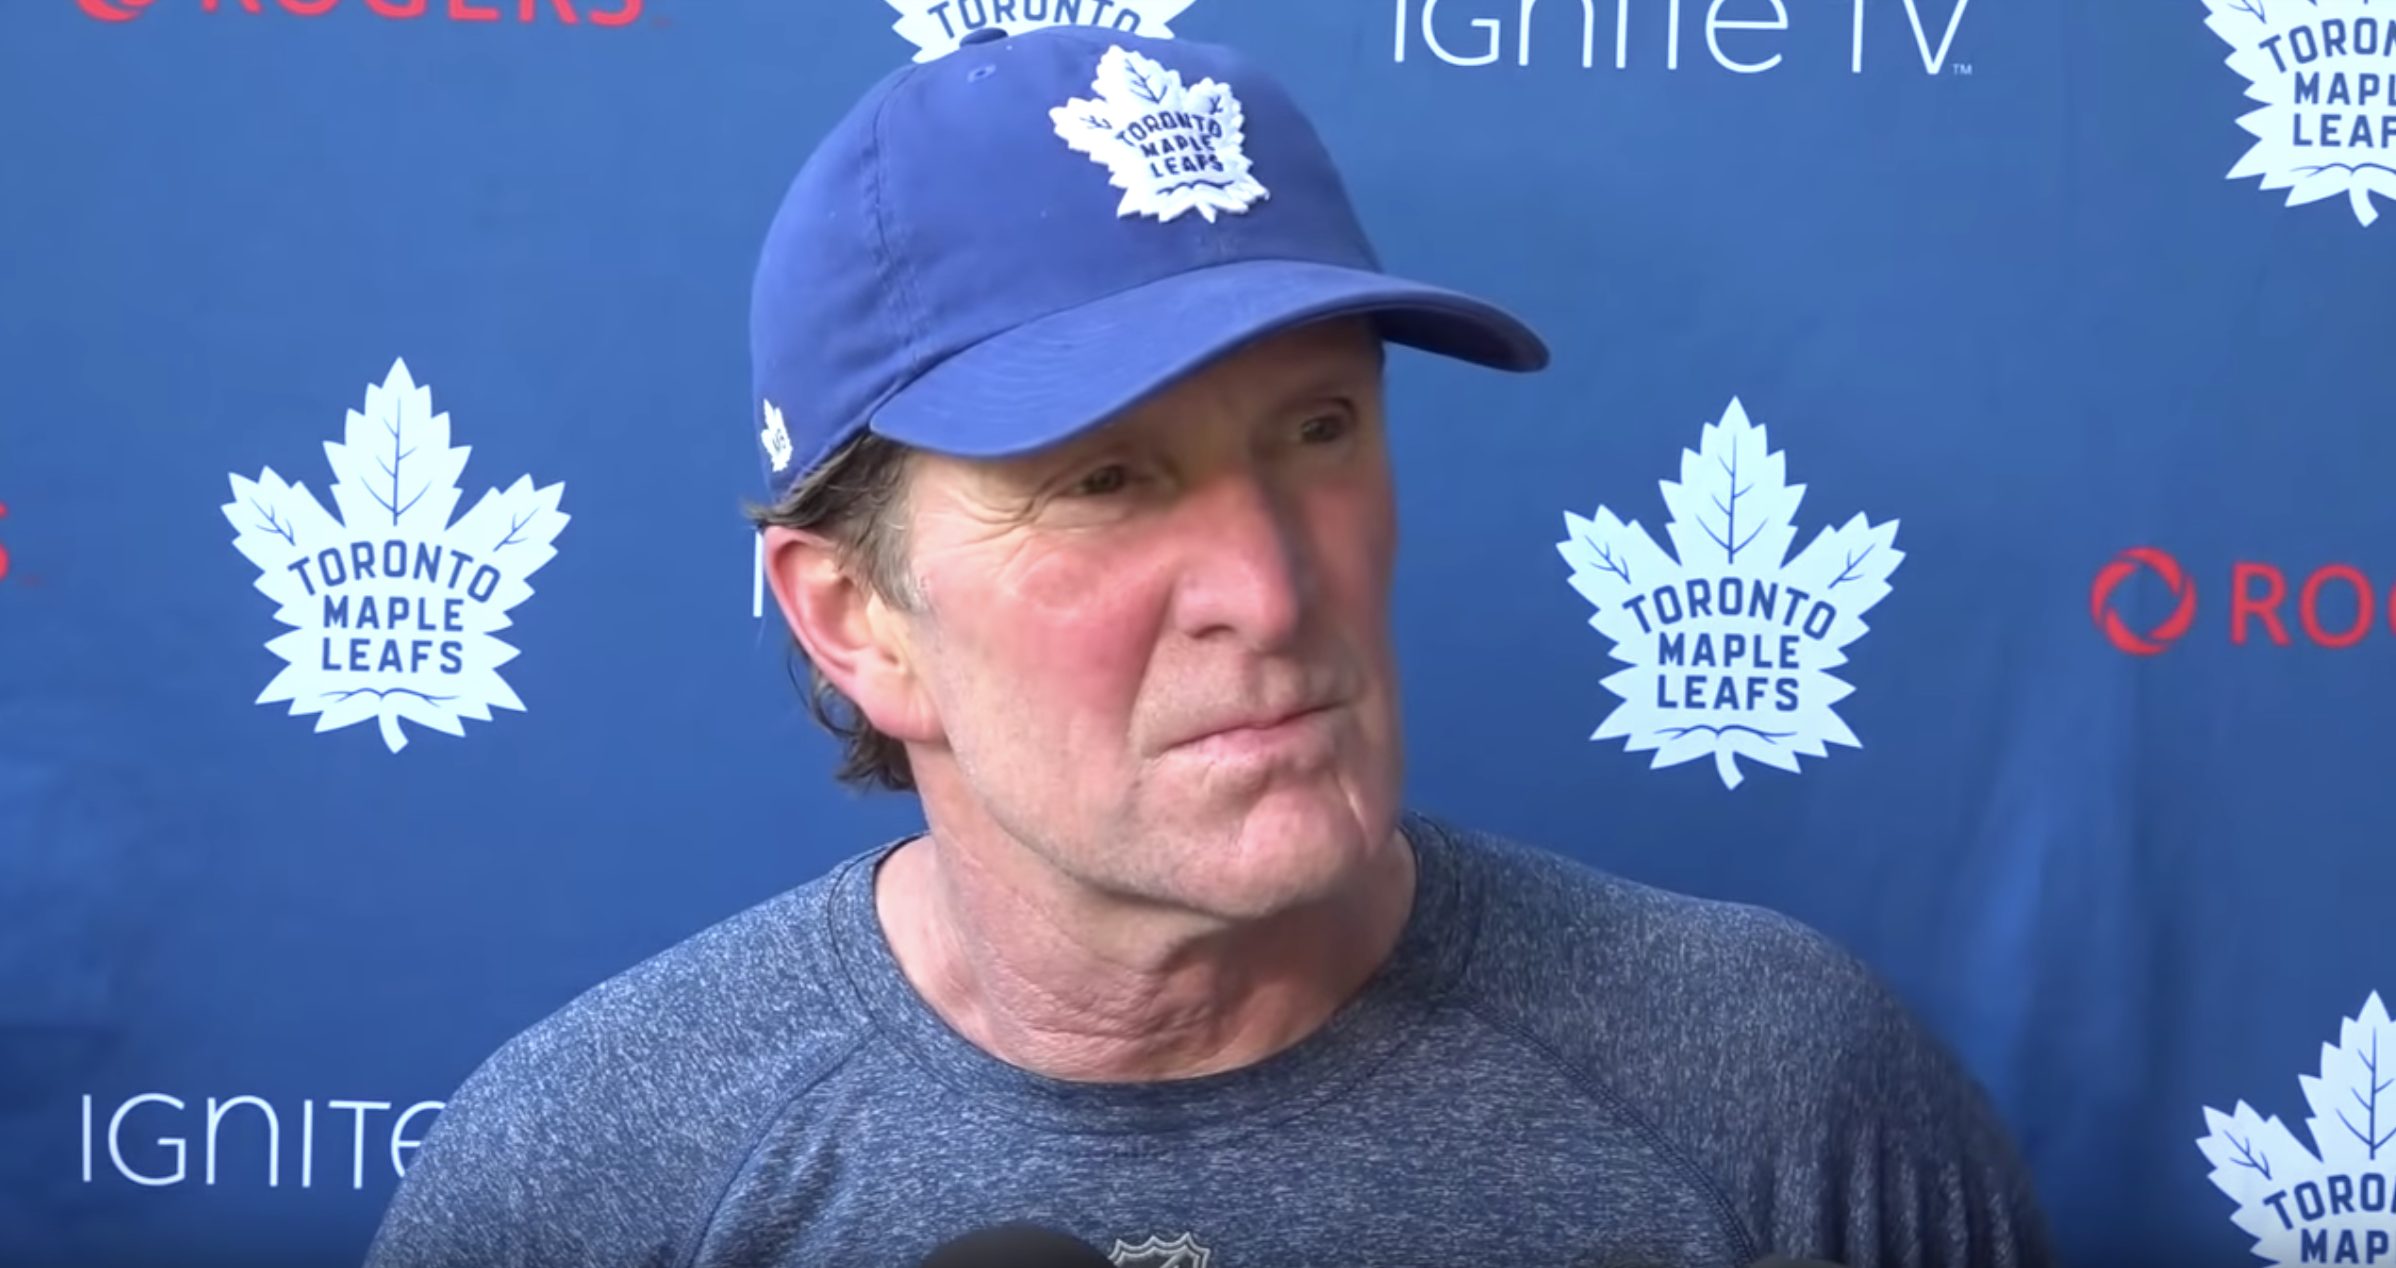 Toronto Maple Leafs' Mike Babcock